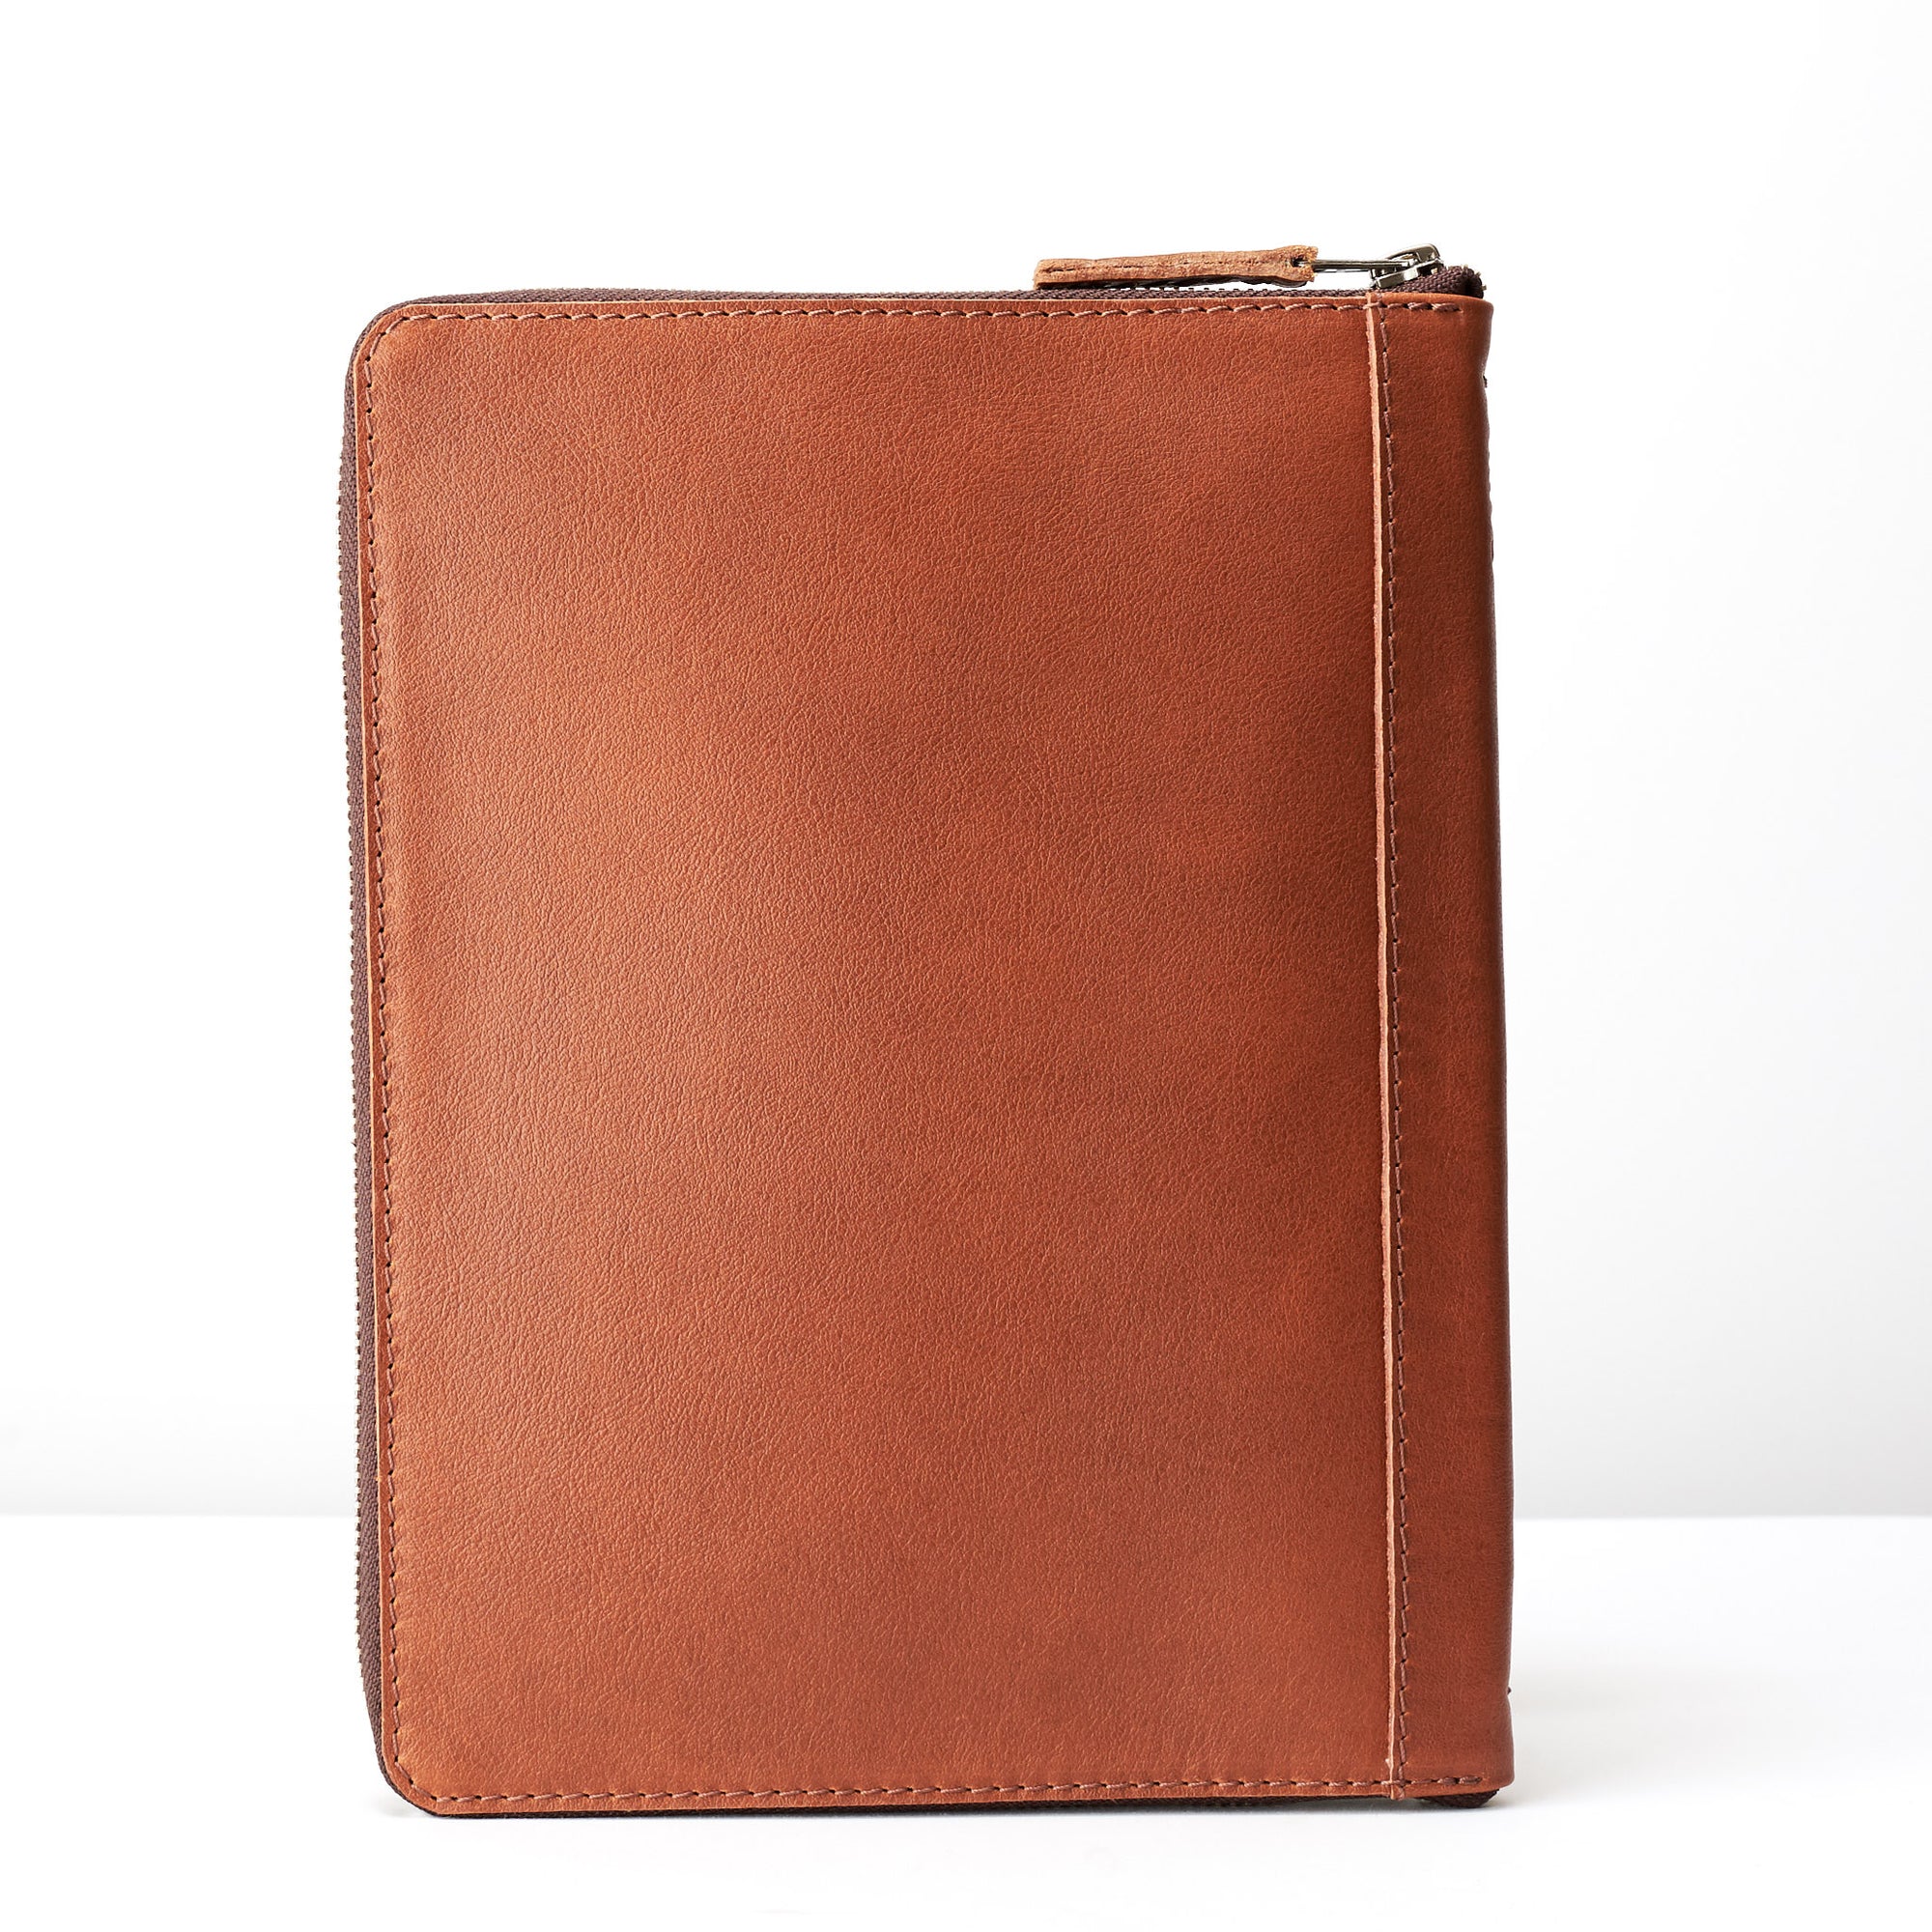 Back. A5 leather notebook cover by Capra Leather. Gifts for artists.